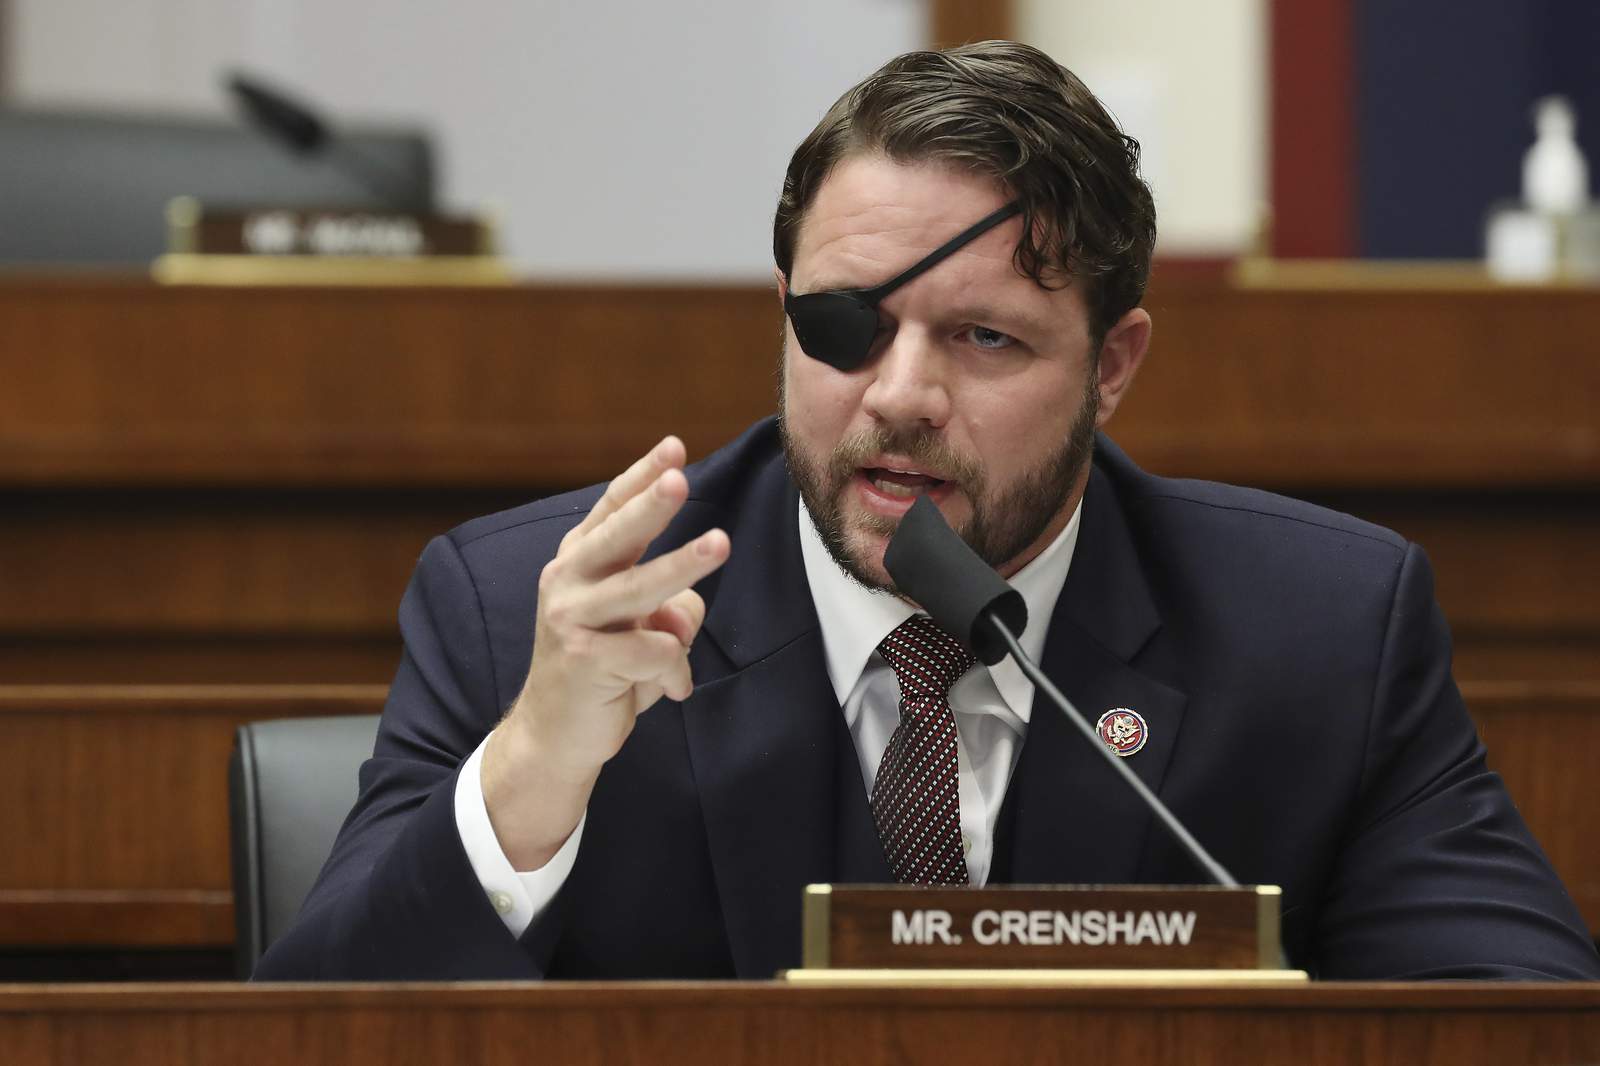 Texas Rep. Crenshaw temporarily blinded after eye surgery